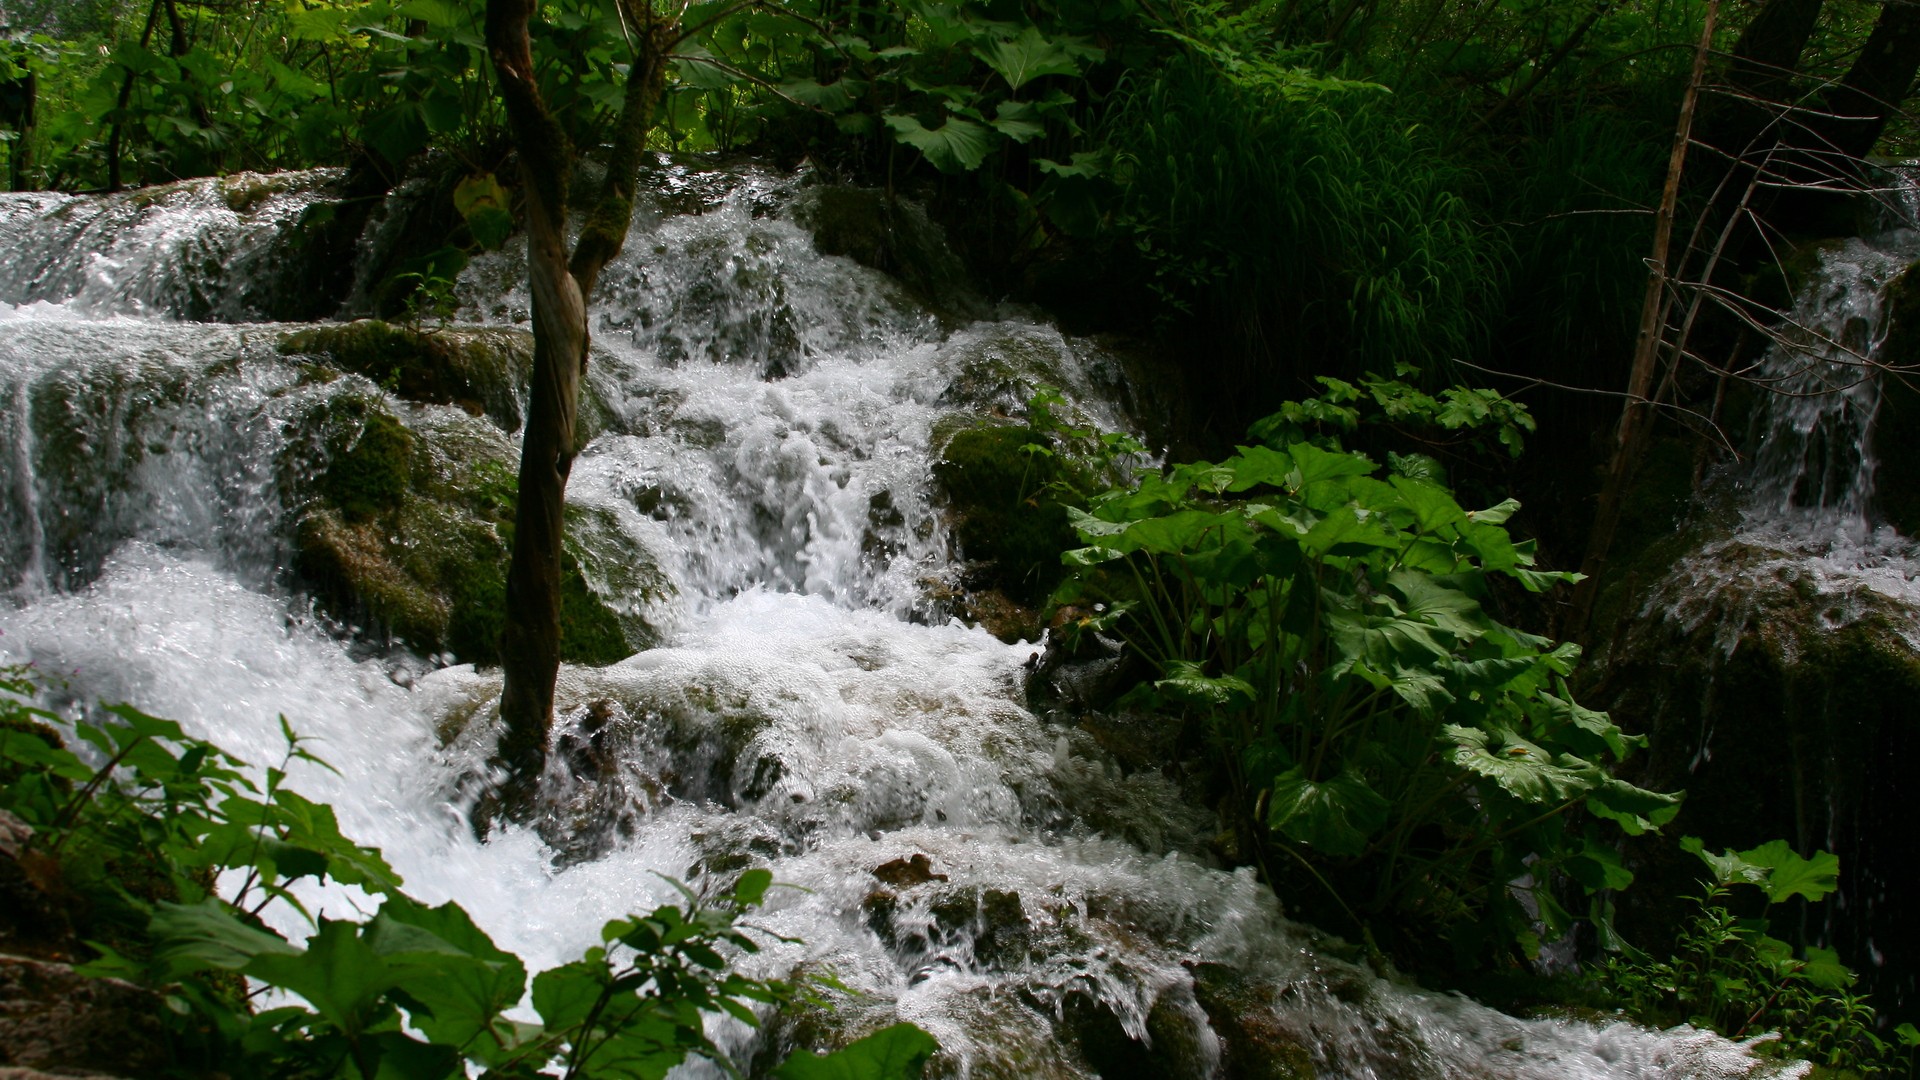 General 1920x1080 nature forest creeks plants